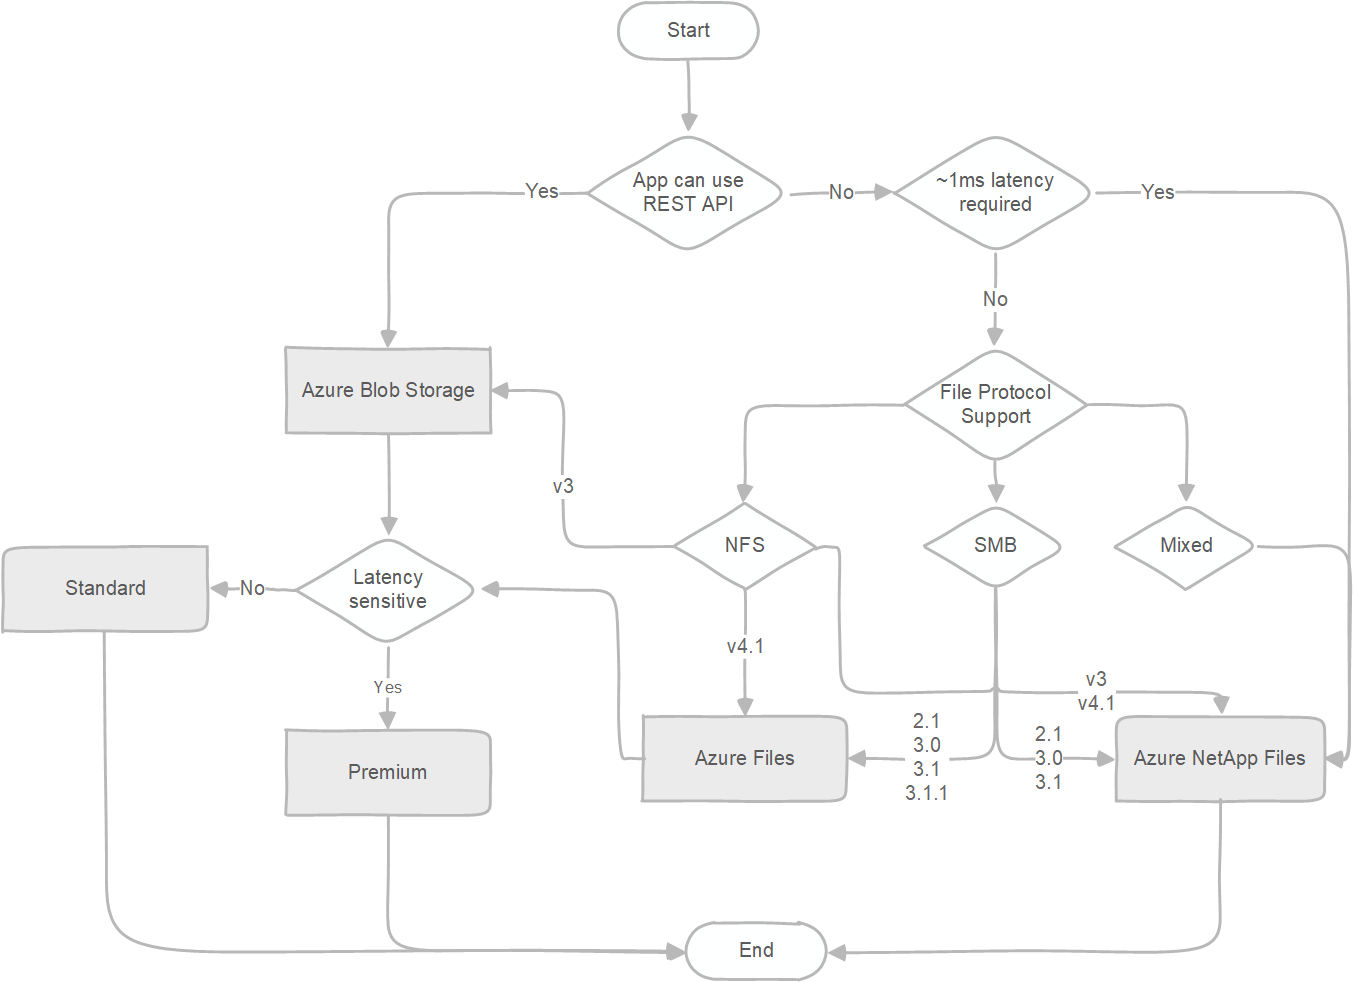 Basic decision tree on choosing the correct file service